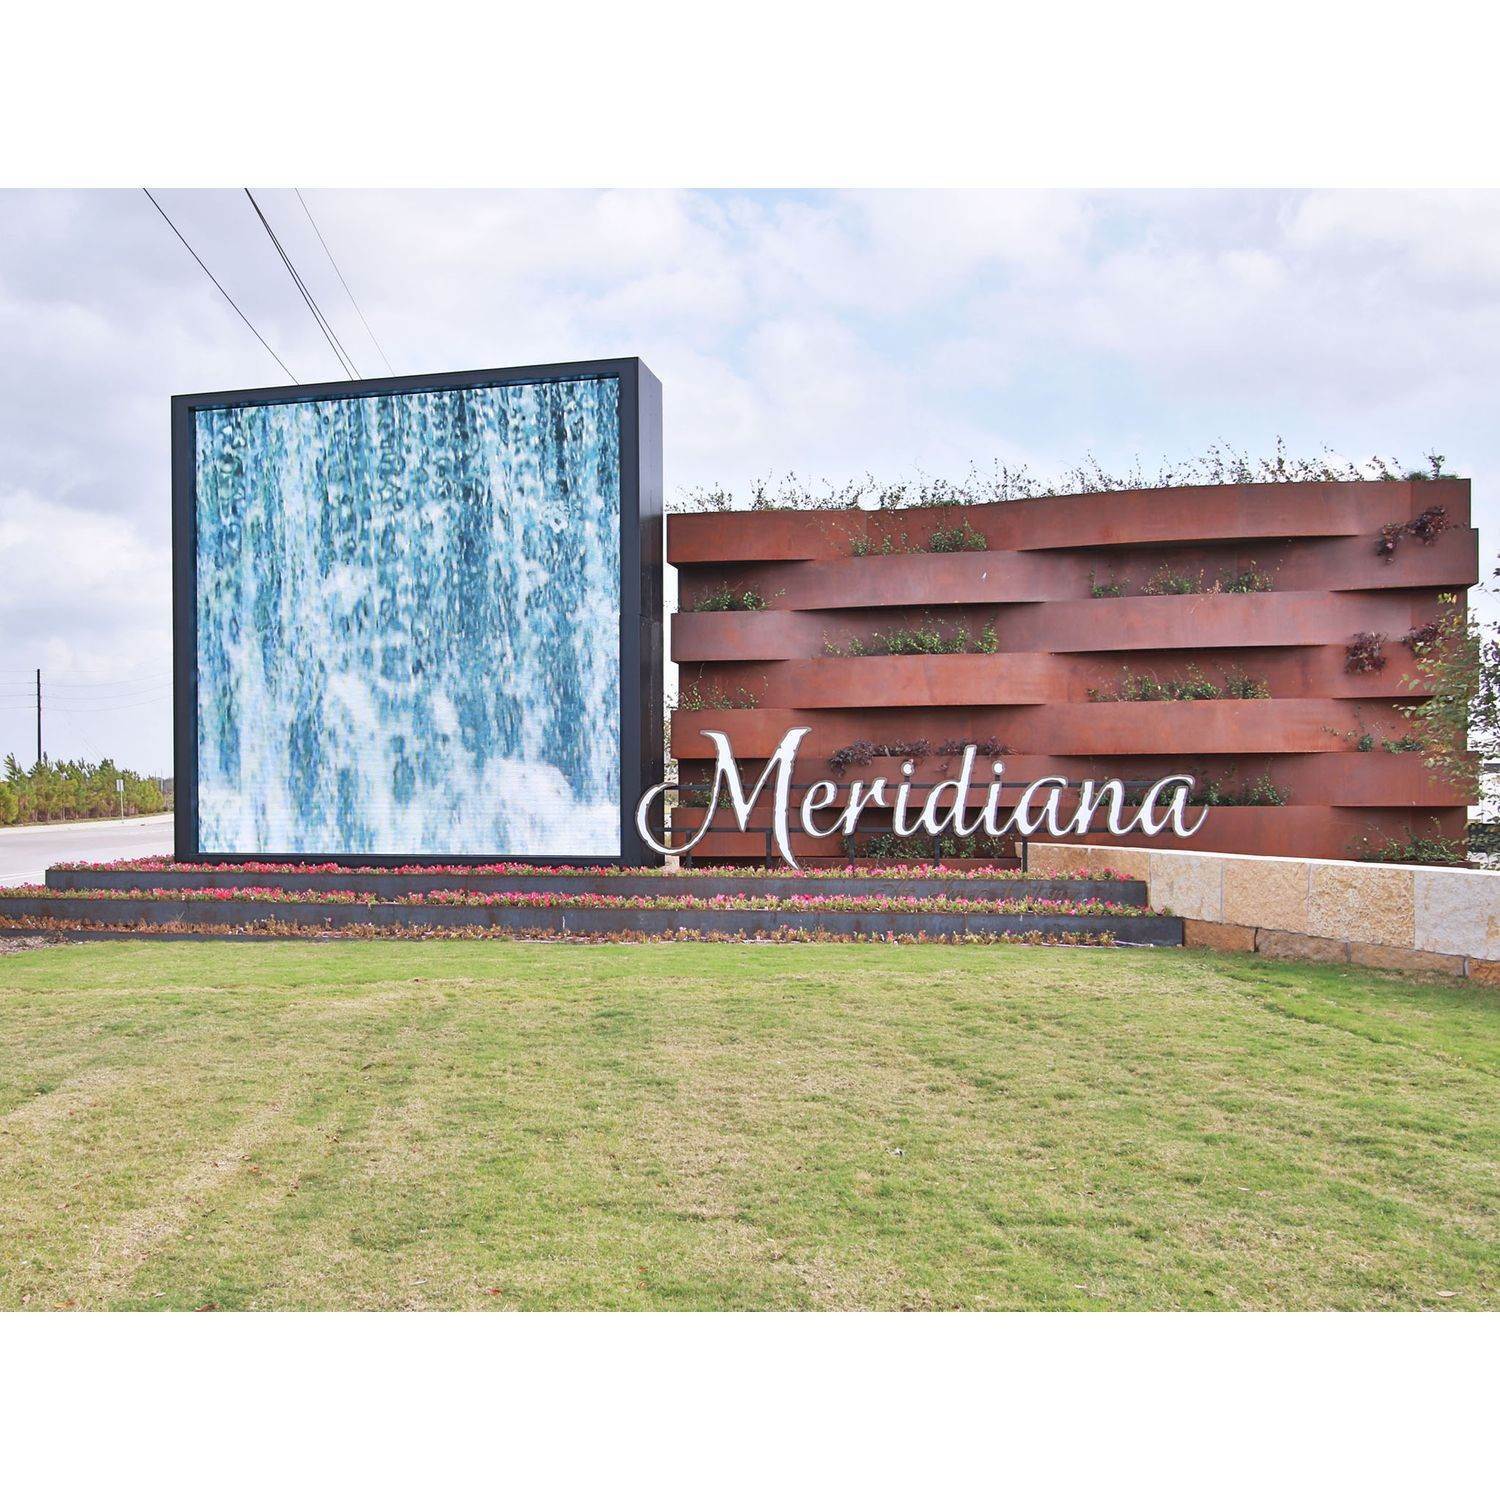 Meridiana 50' xây dựng tại 5310 Majestic Court, Rosharon, TX 77583